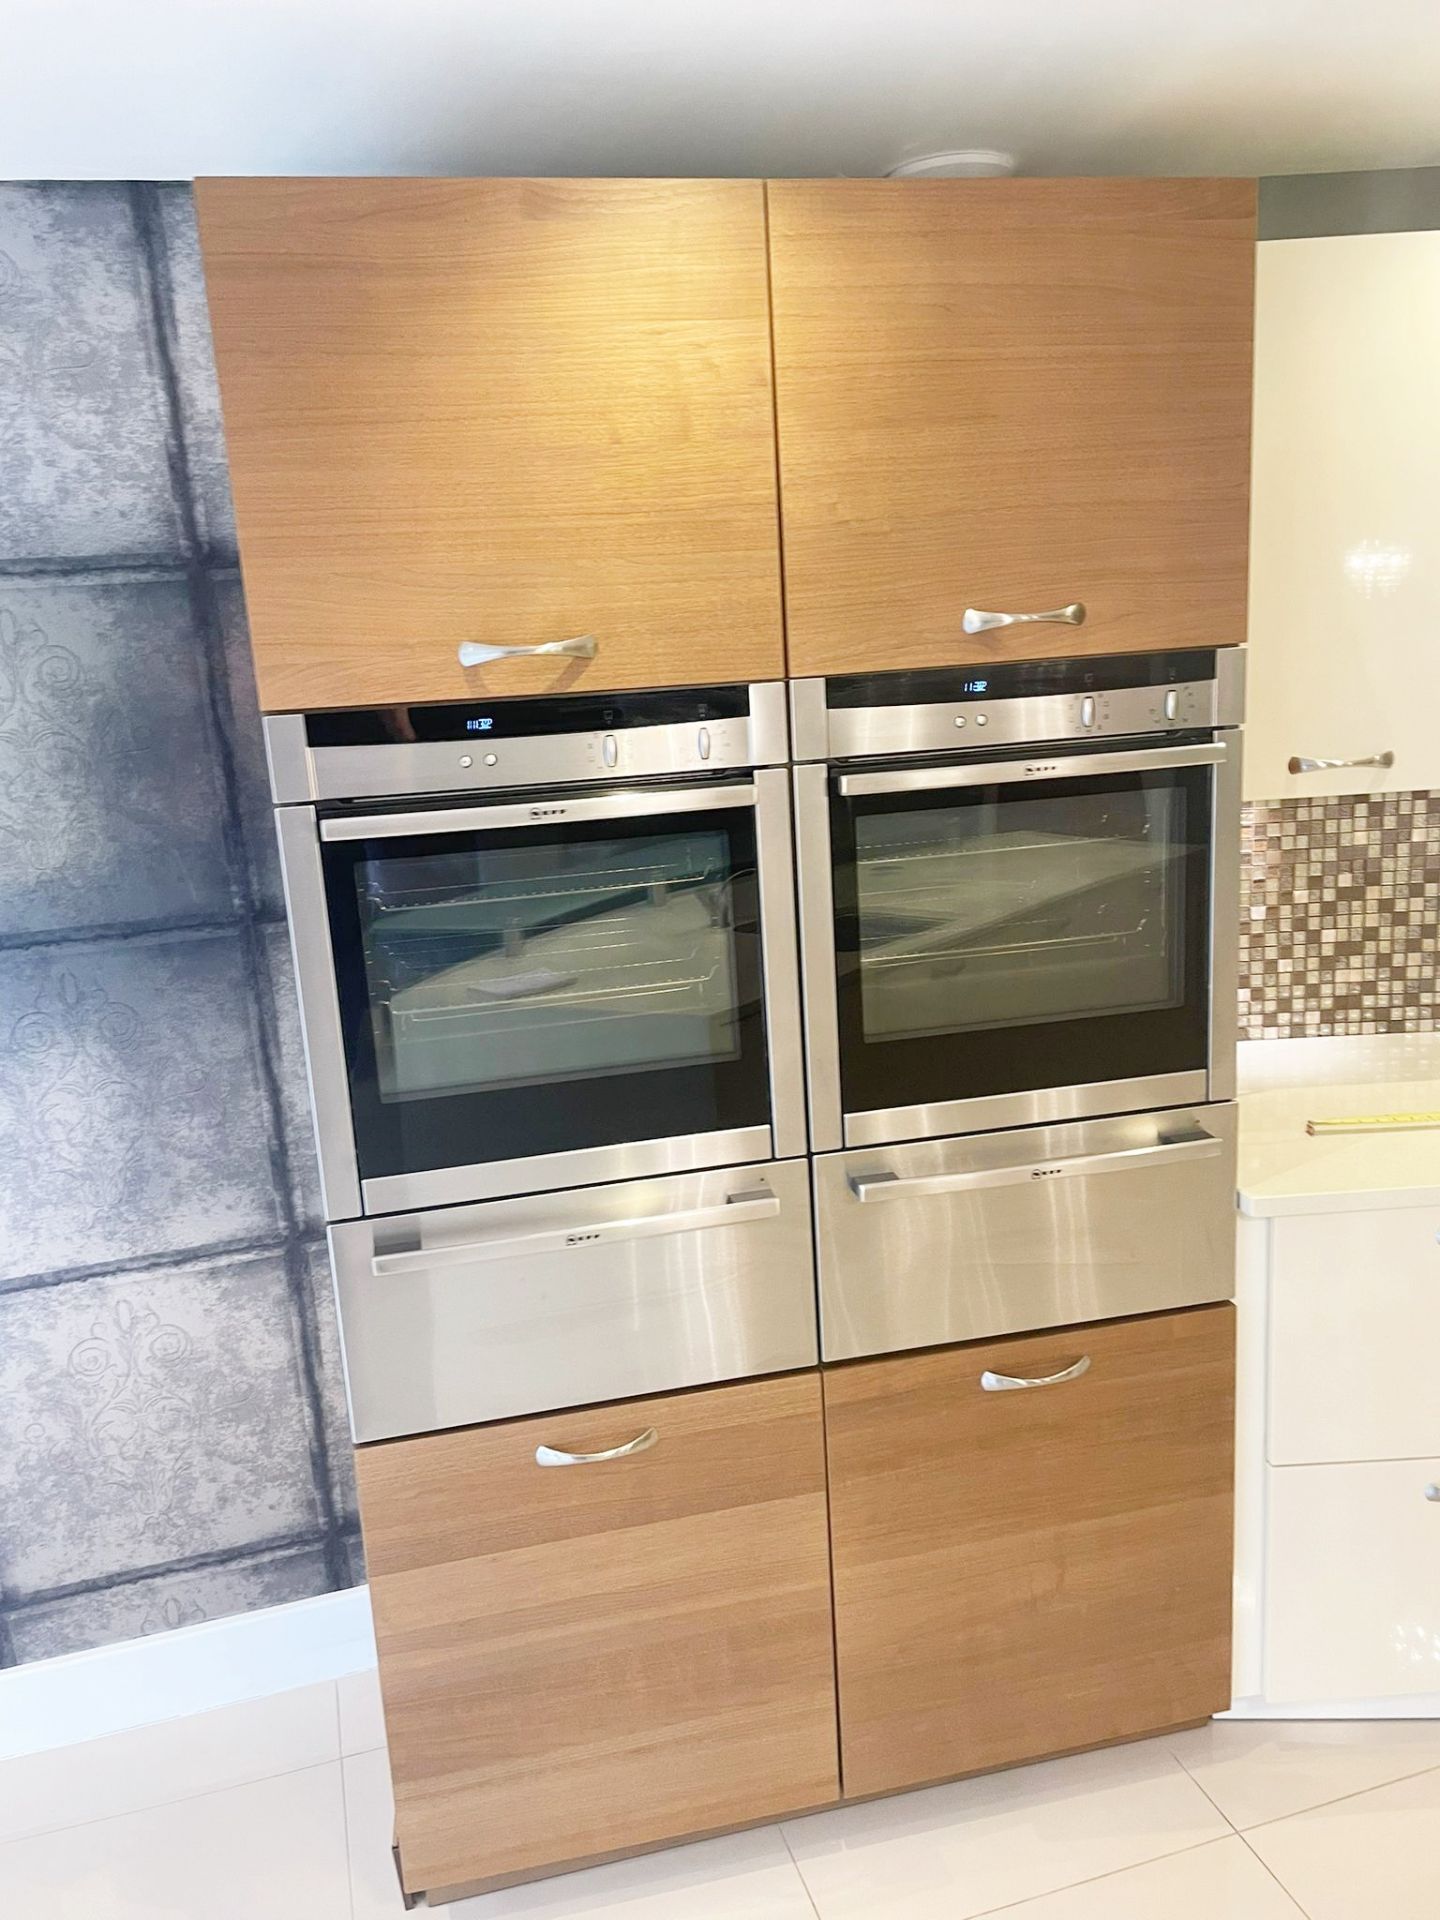 1 x Contemporary ALNO Fitted Kitchen With Branded  Appliances Created By Award Winning Kitchen - Image 40 of 89